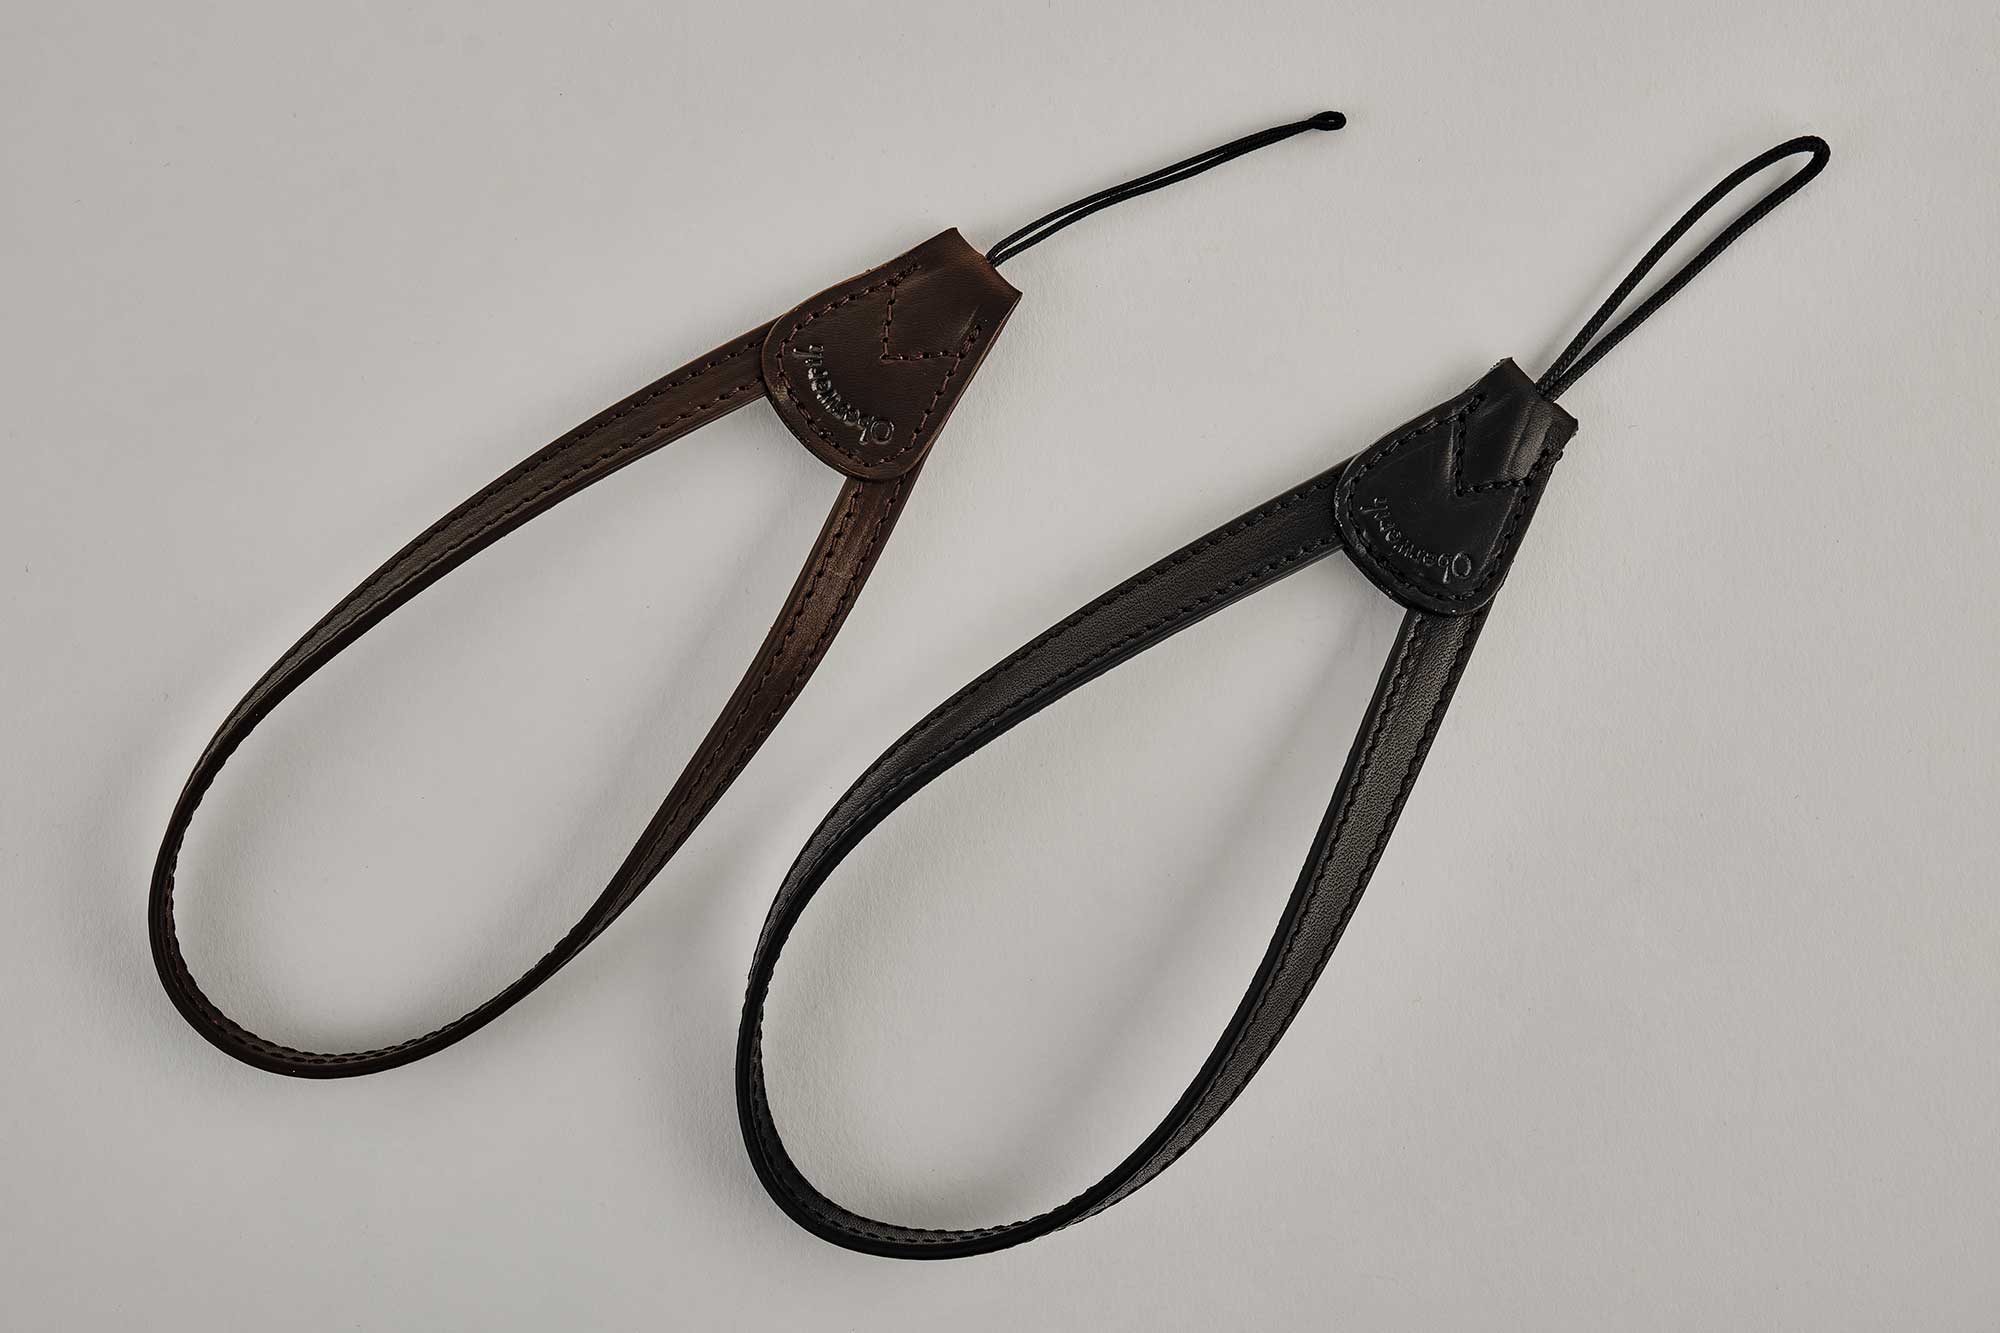 Camera hand strap LAHN with cord